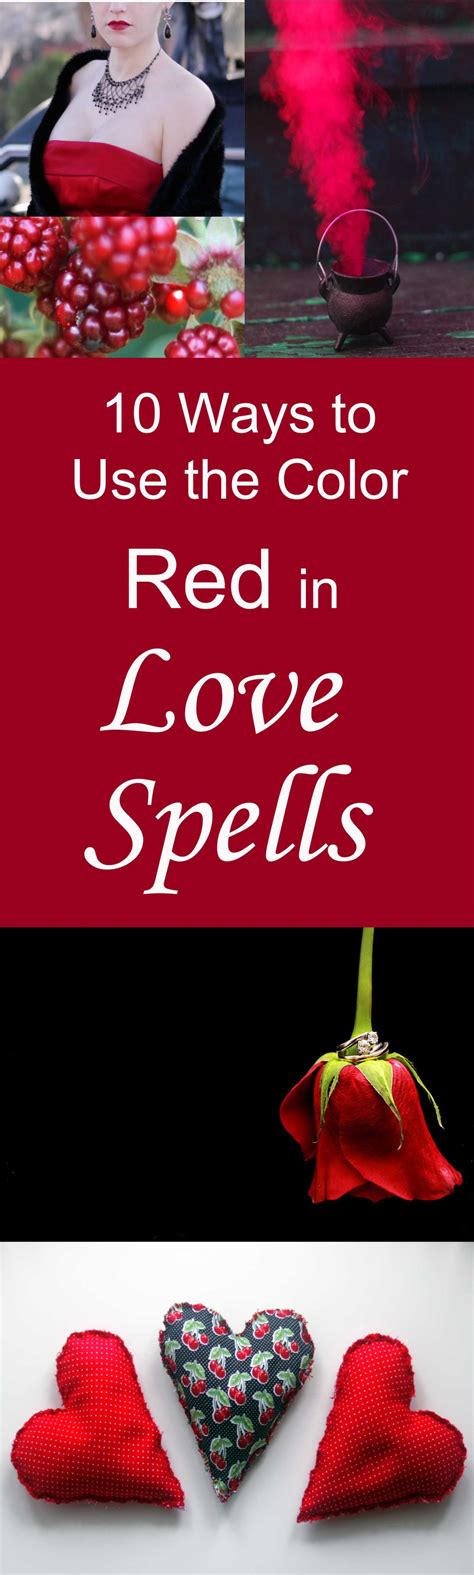 Red Candle Magic: Igniting the Flame of Personal Power